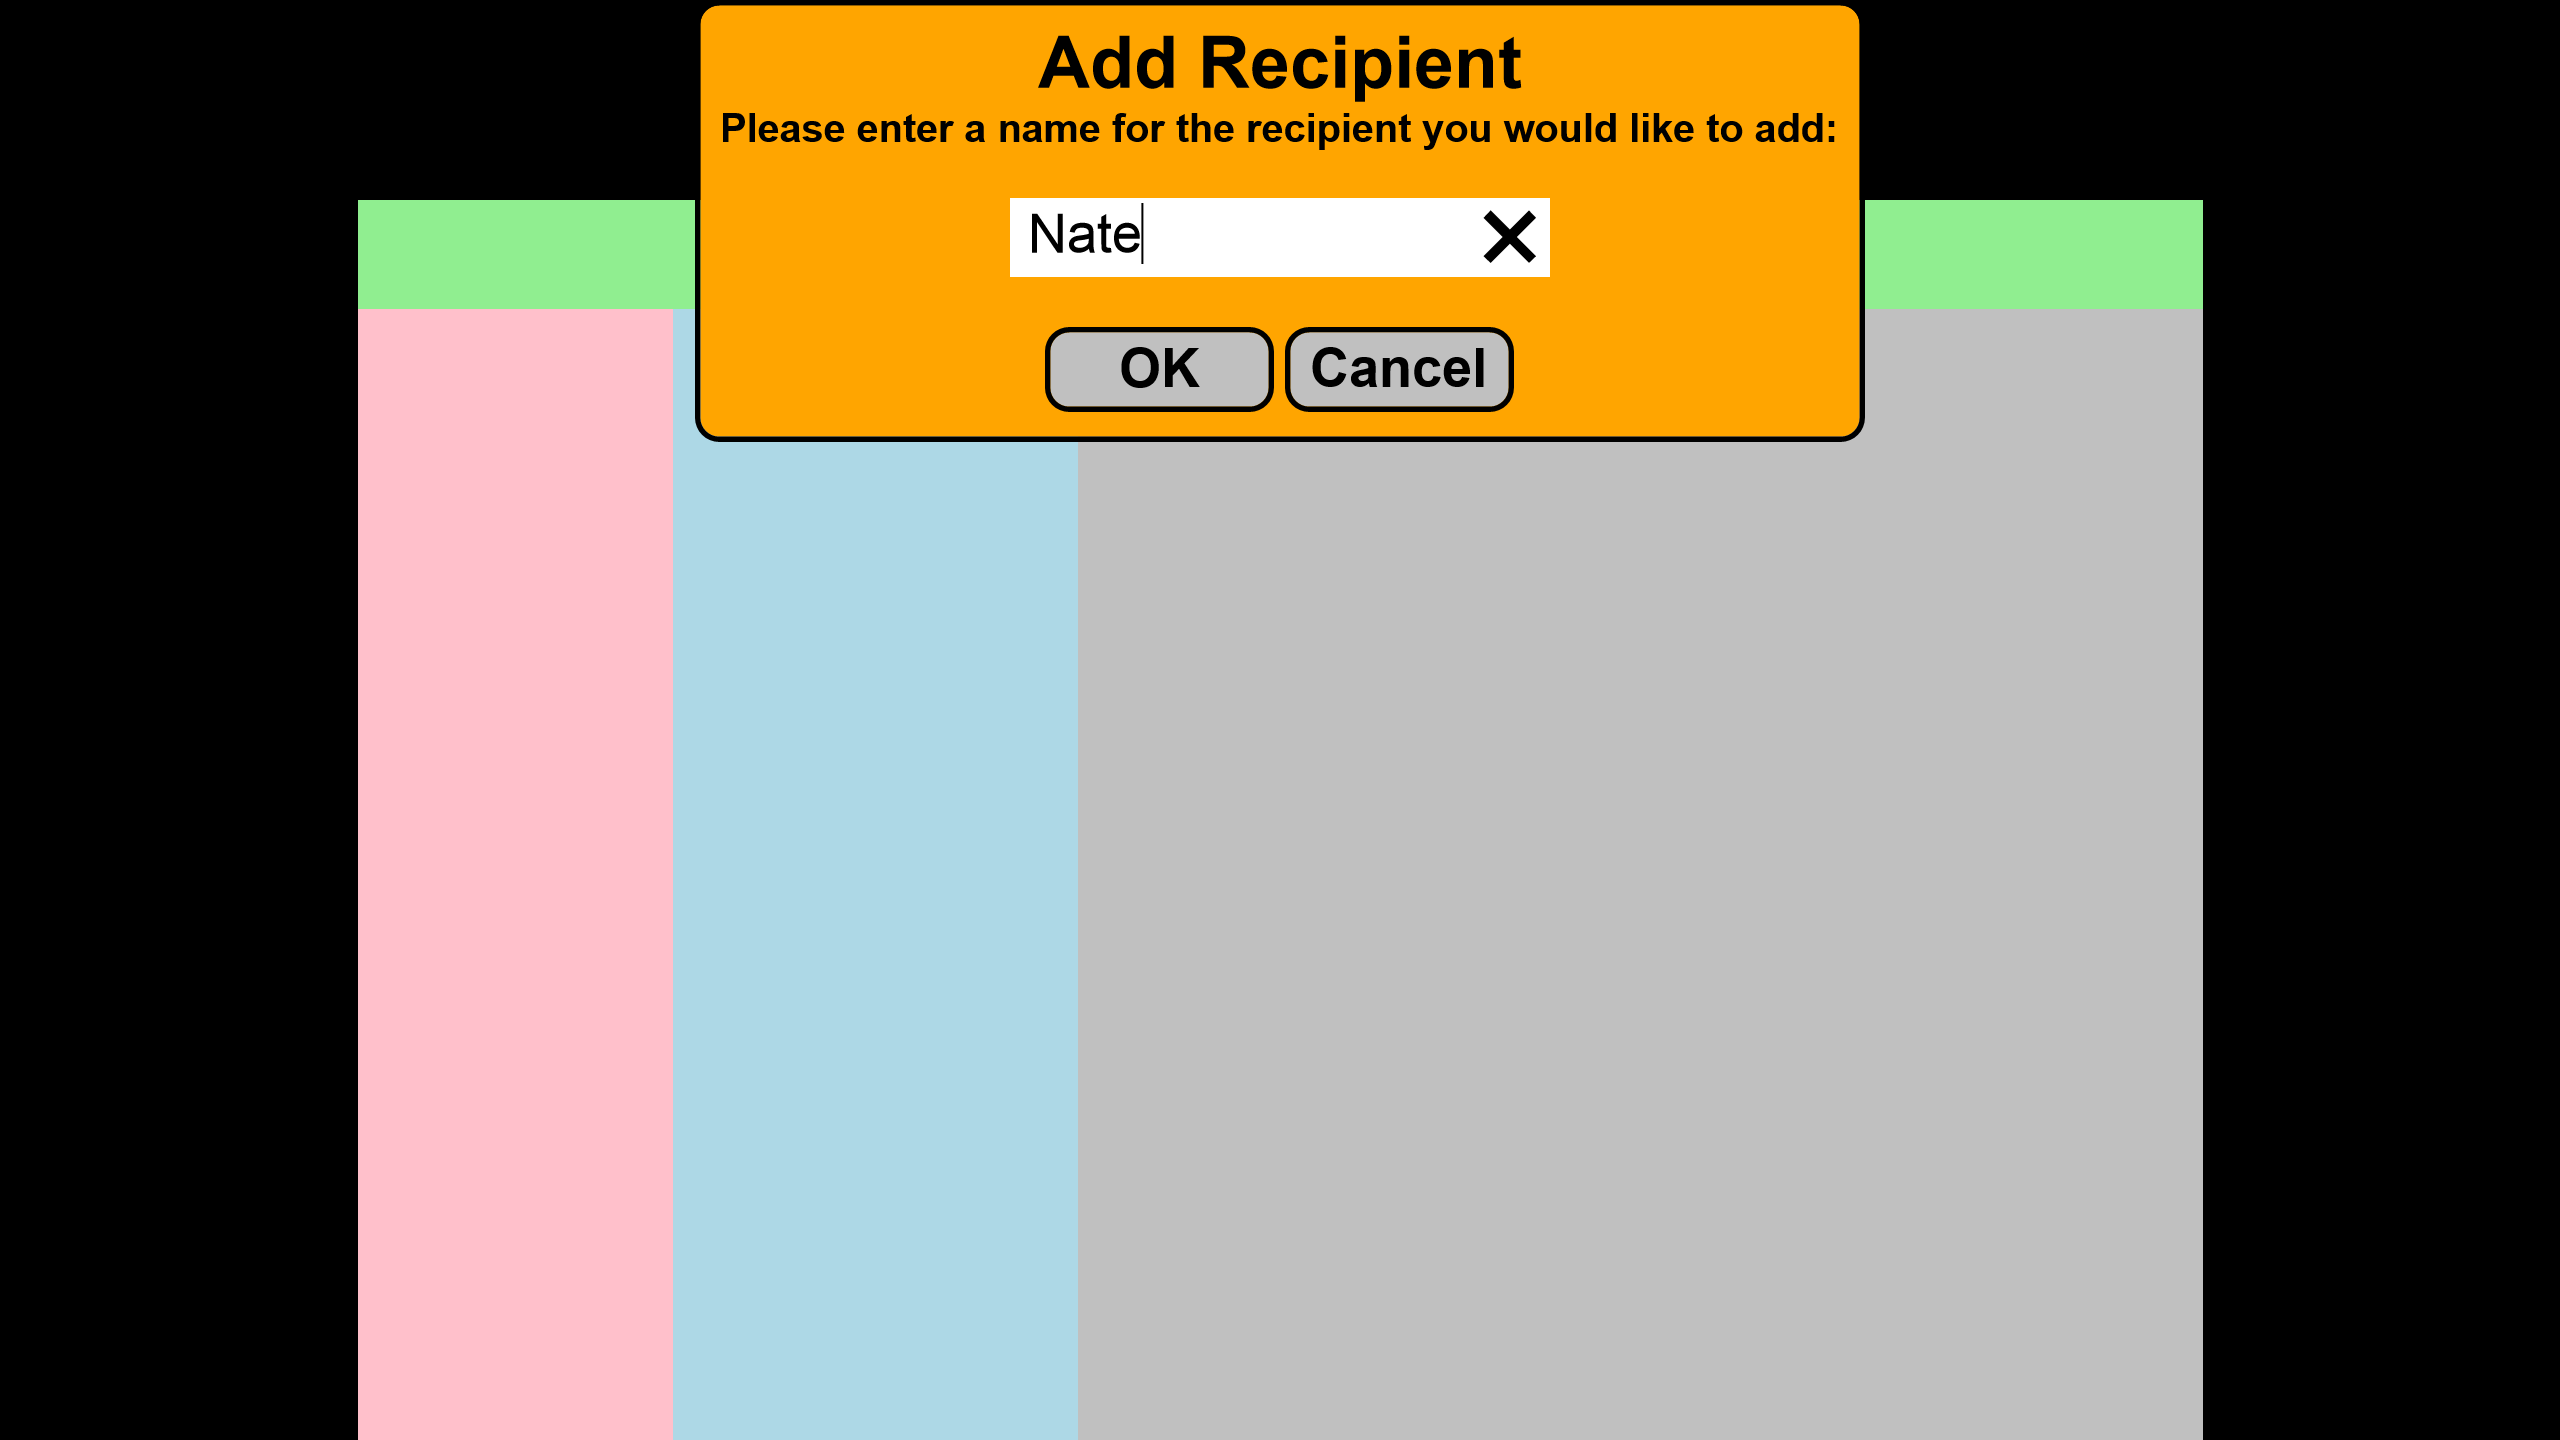 Adding a recipient is as easy as entering their name